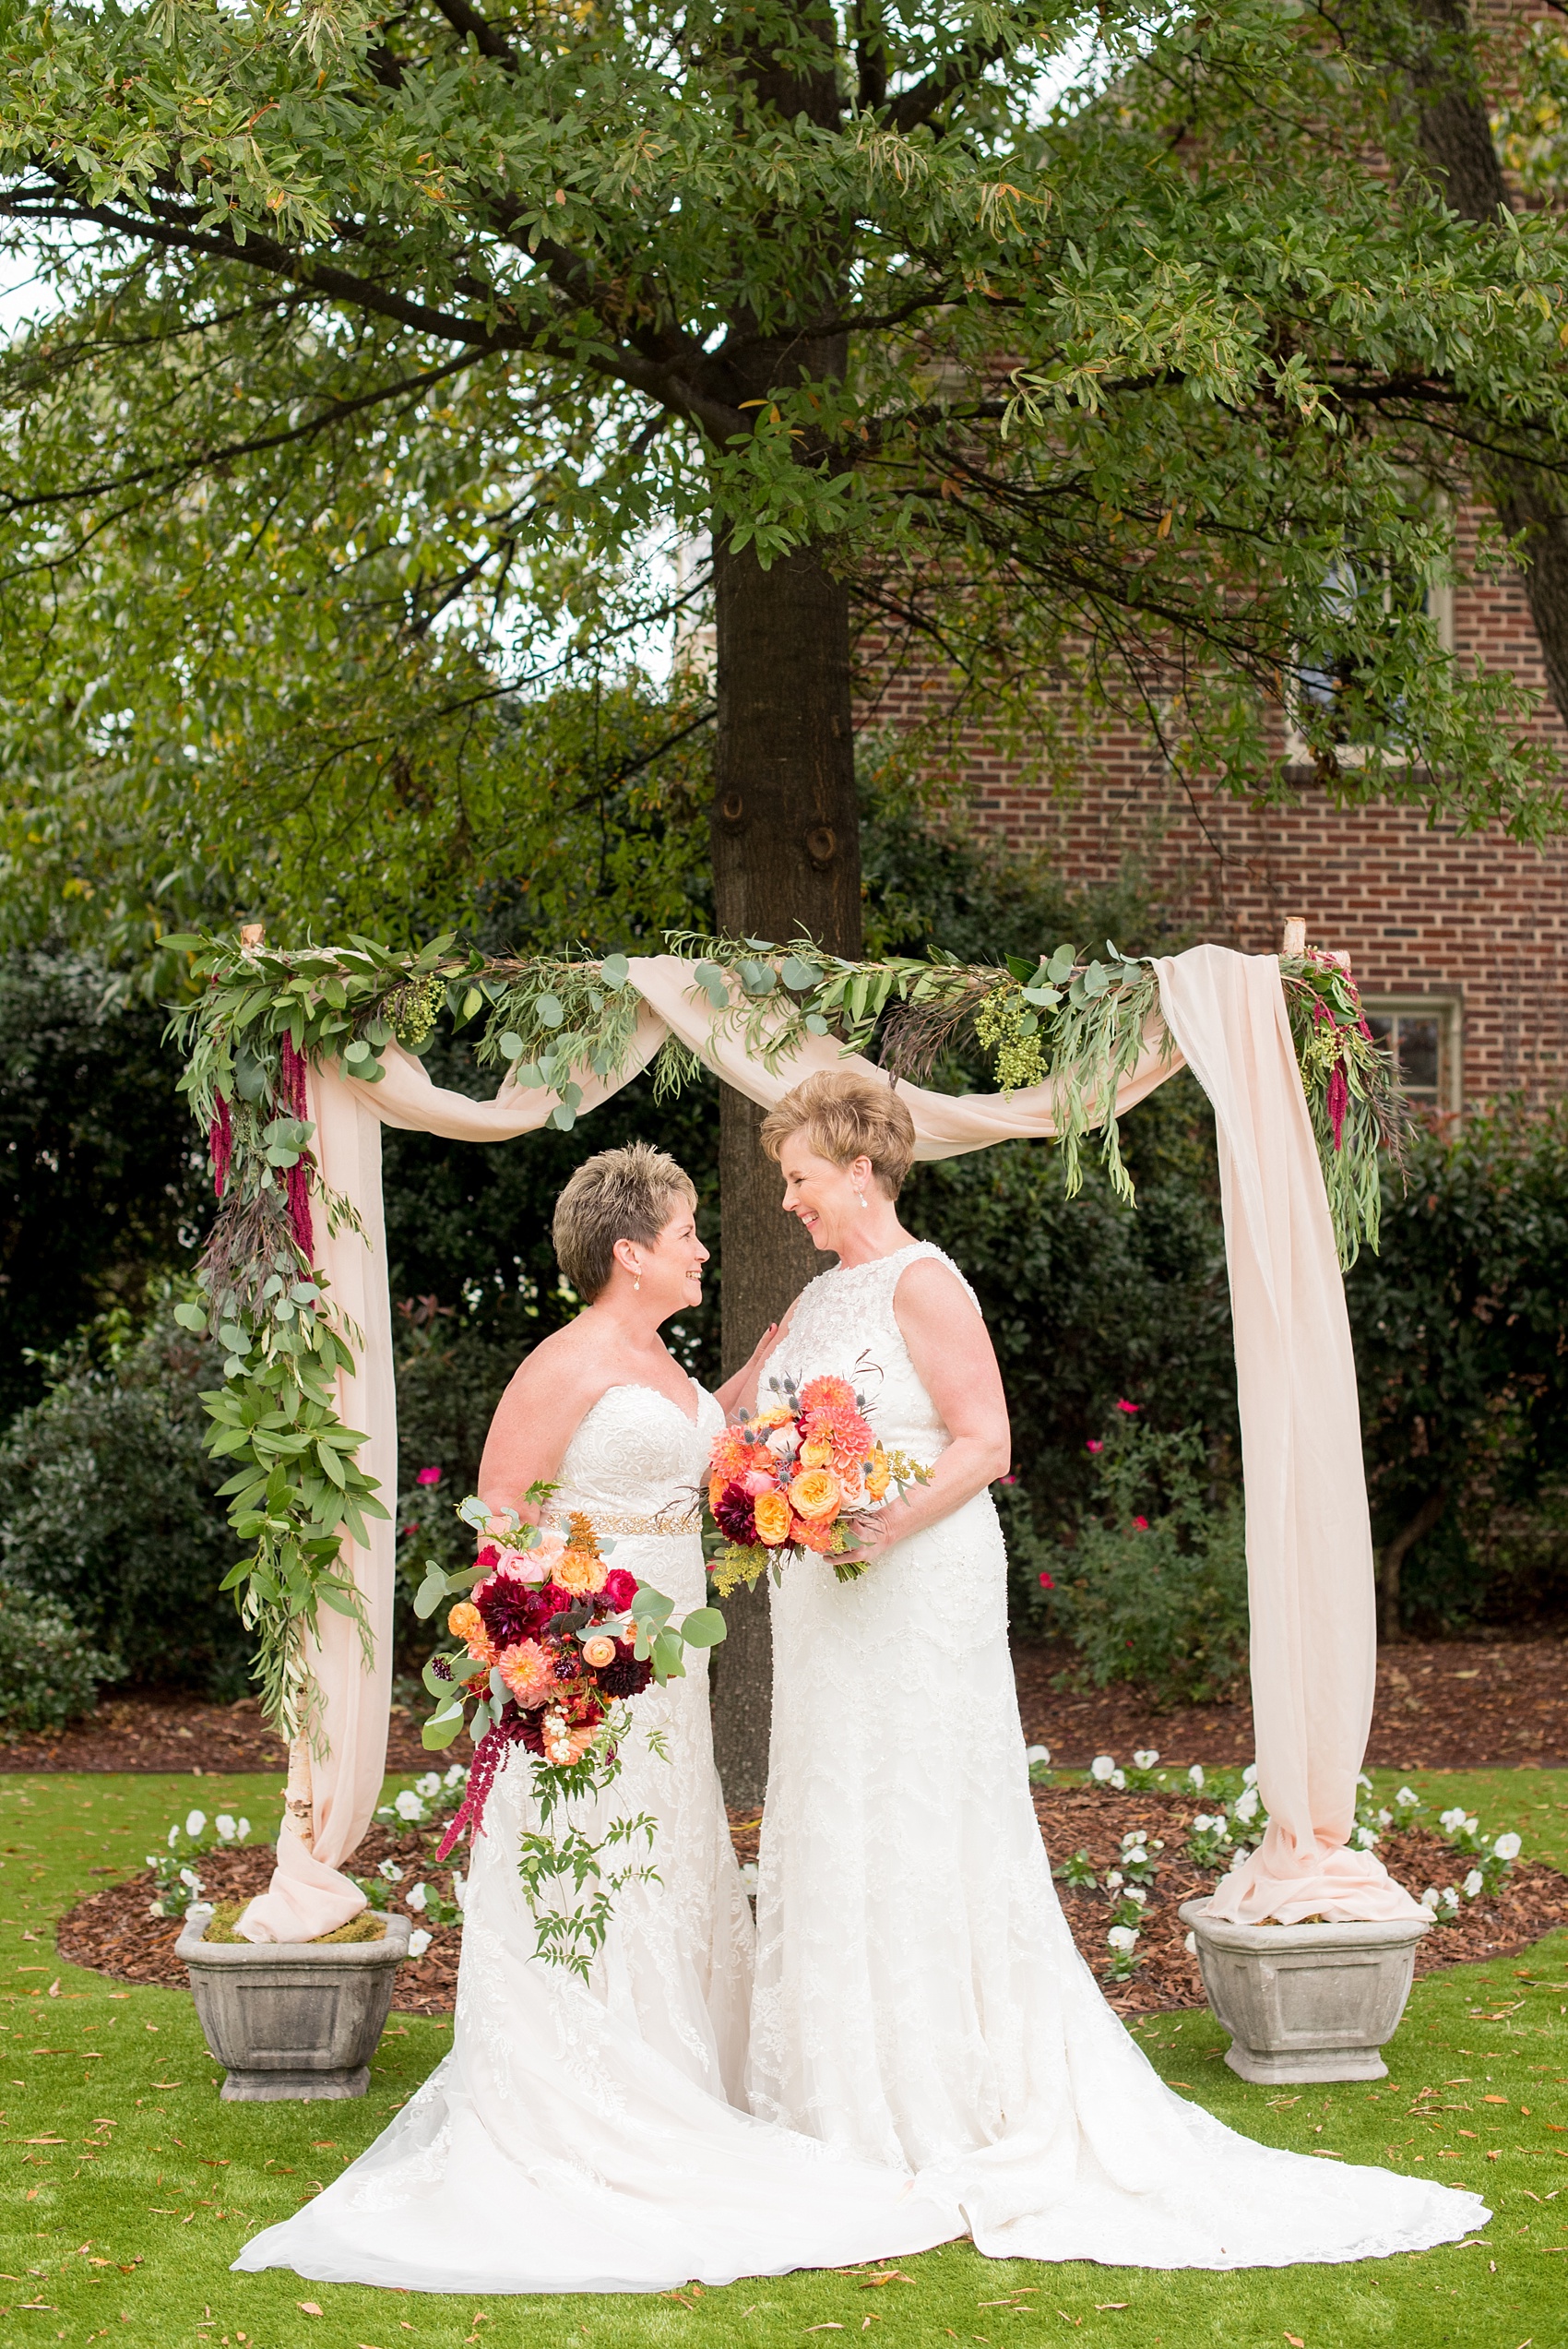 Mikkel Paige Photography photos from a Merrimon-Wynne House wedding in Raleigh. Two brides in front of their floral ceremony arbor for a same-sex, lesbian wedding.